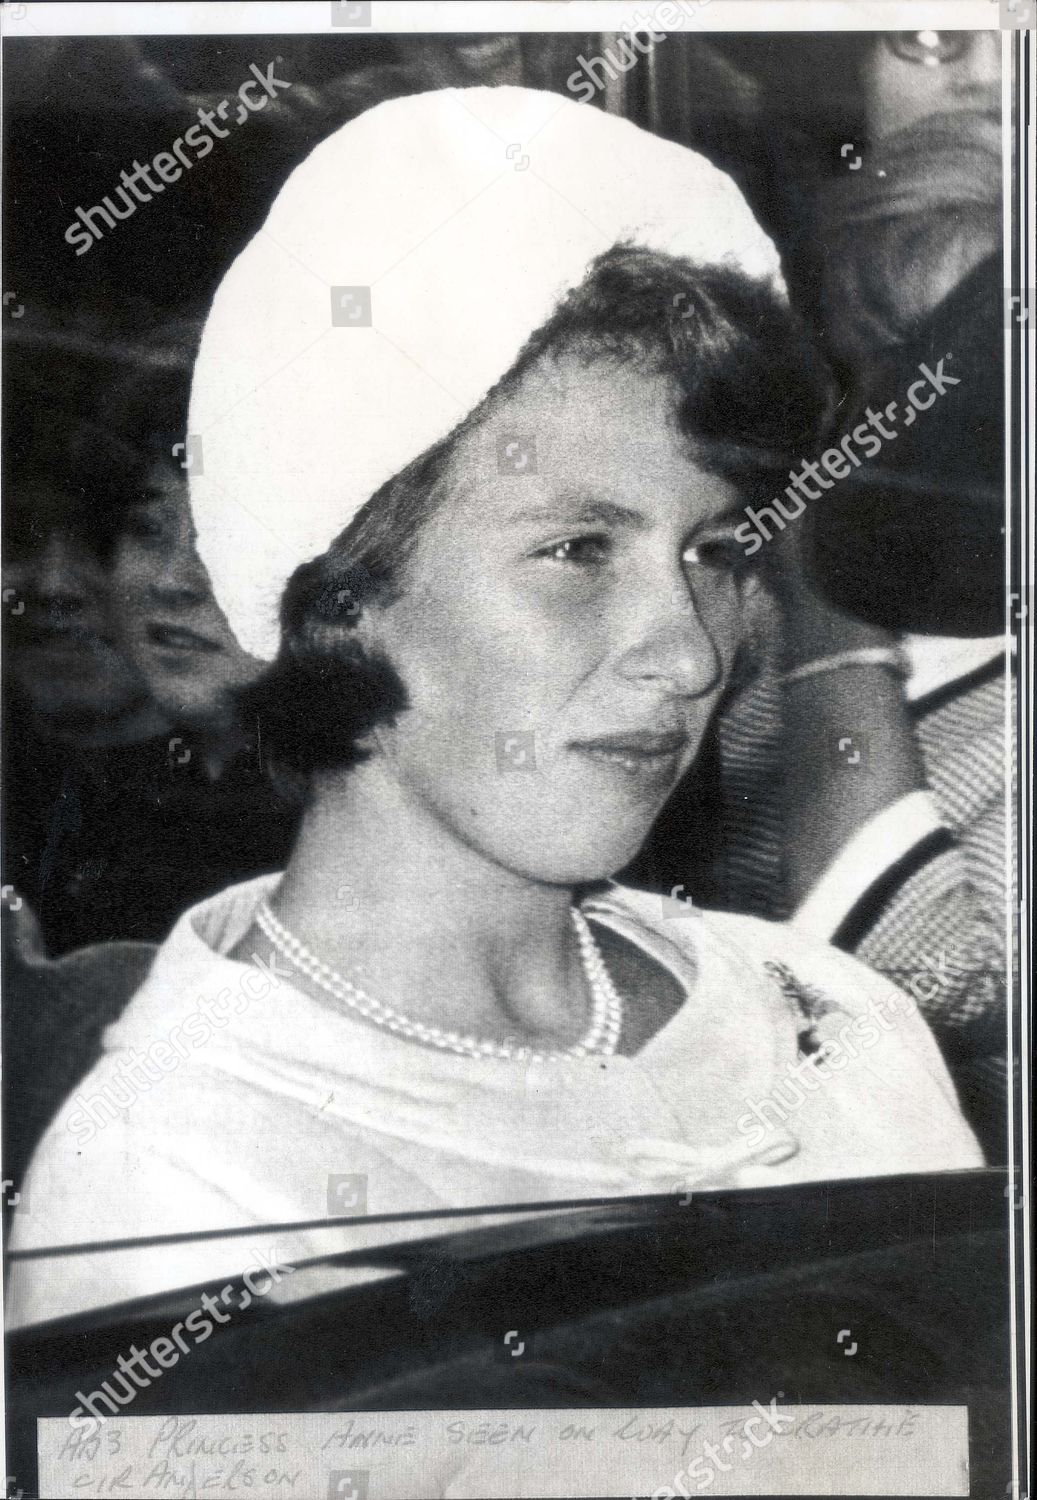 princess-anne-now-princess-royal-august-1966-princess-anne-is-pictured-at-church-at-crathie-near-balmoral-where-the-royal-family-is-on-holiday-royalty-shutterstock-editorial-890780a.jpg